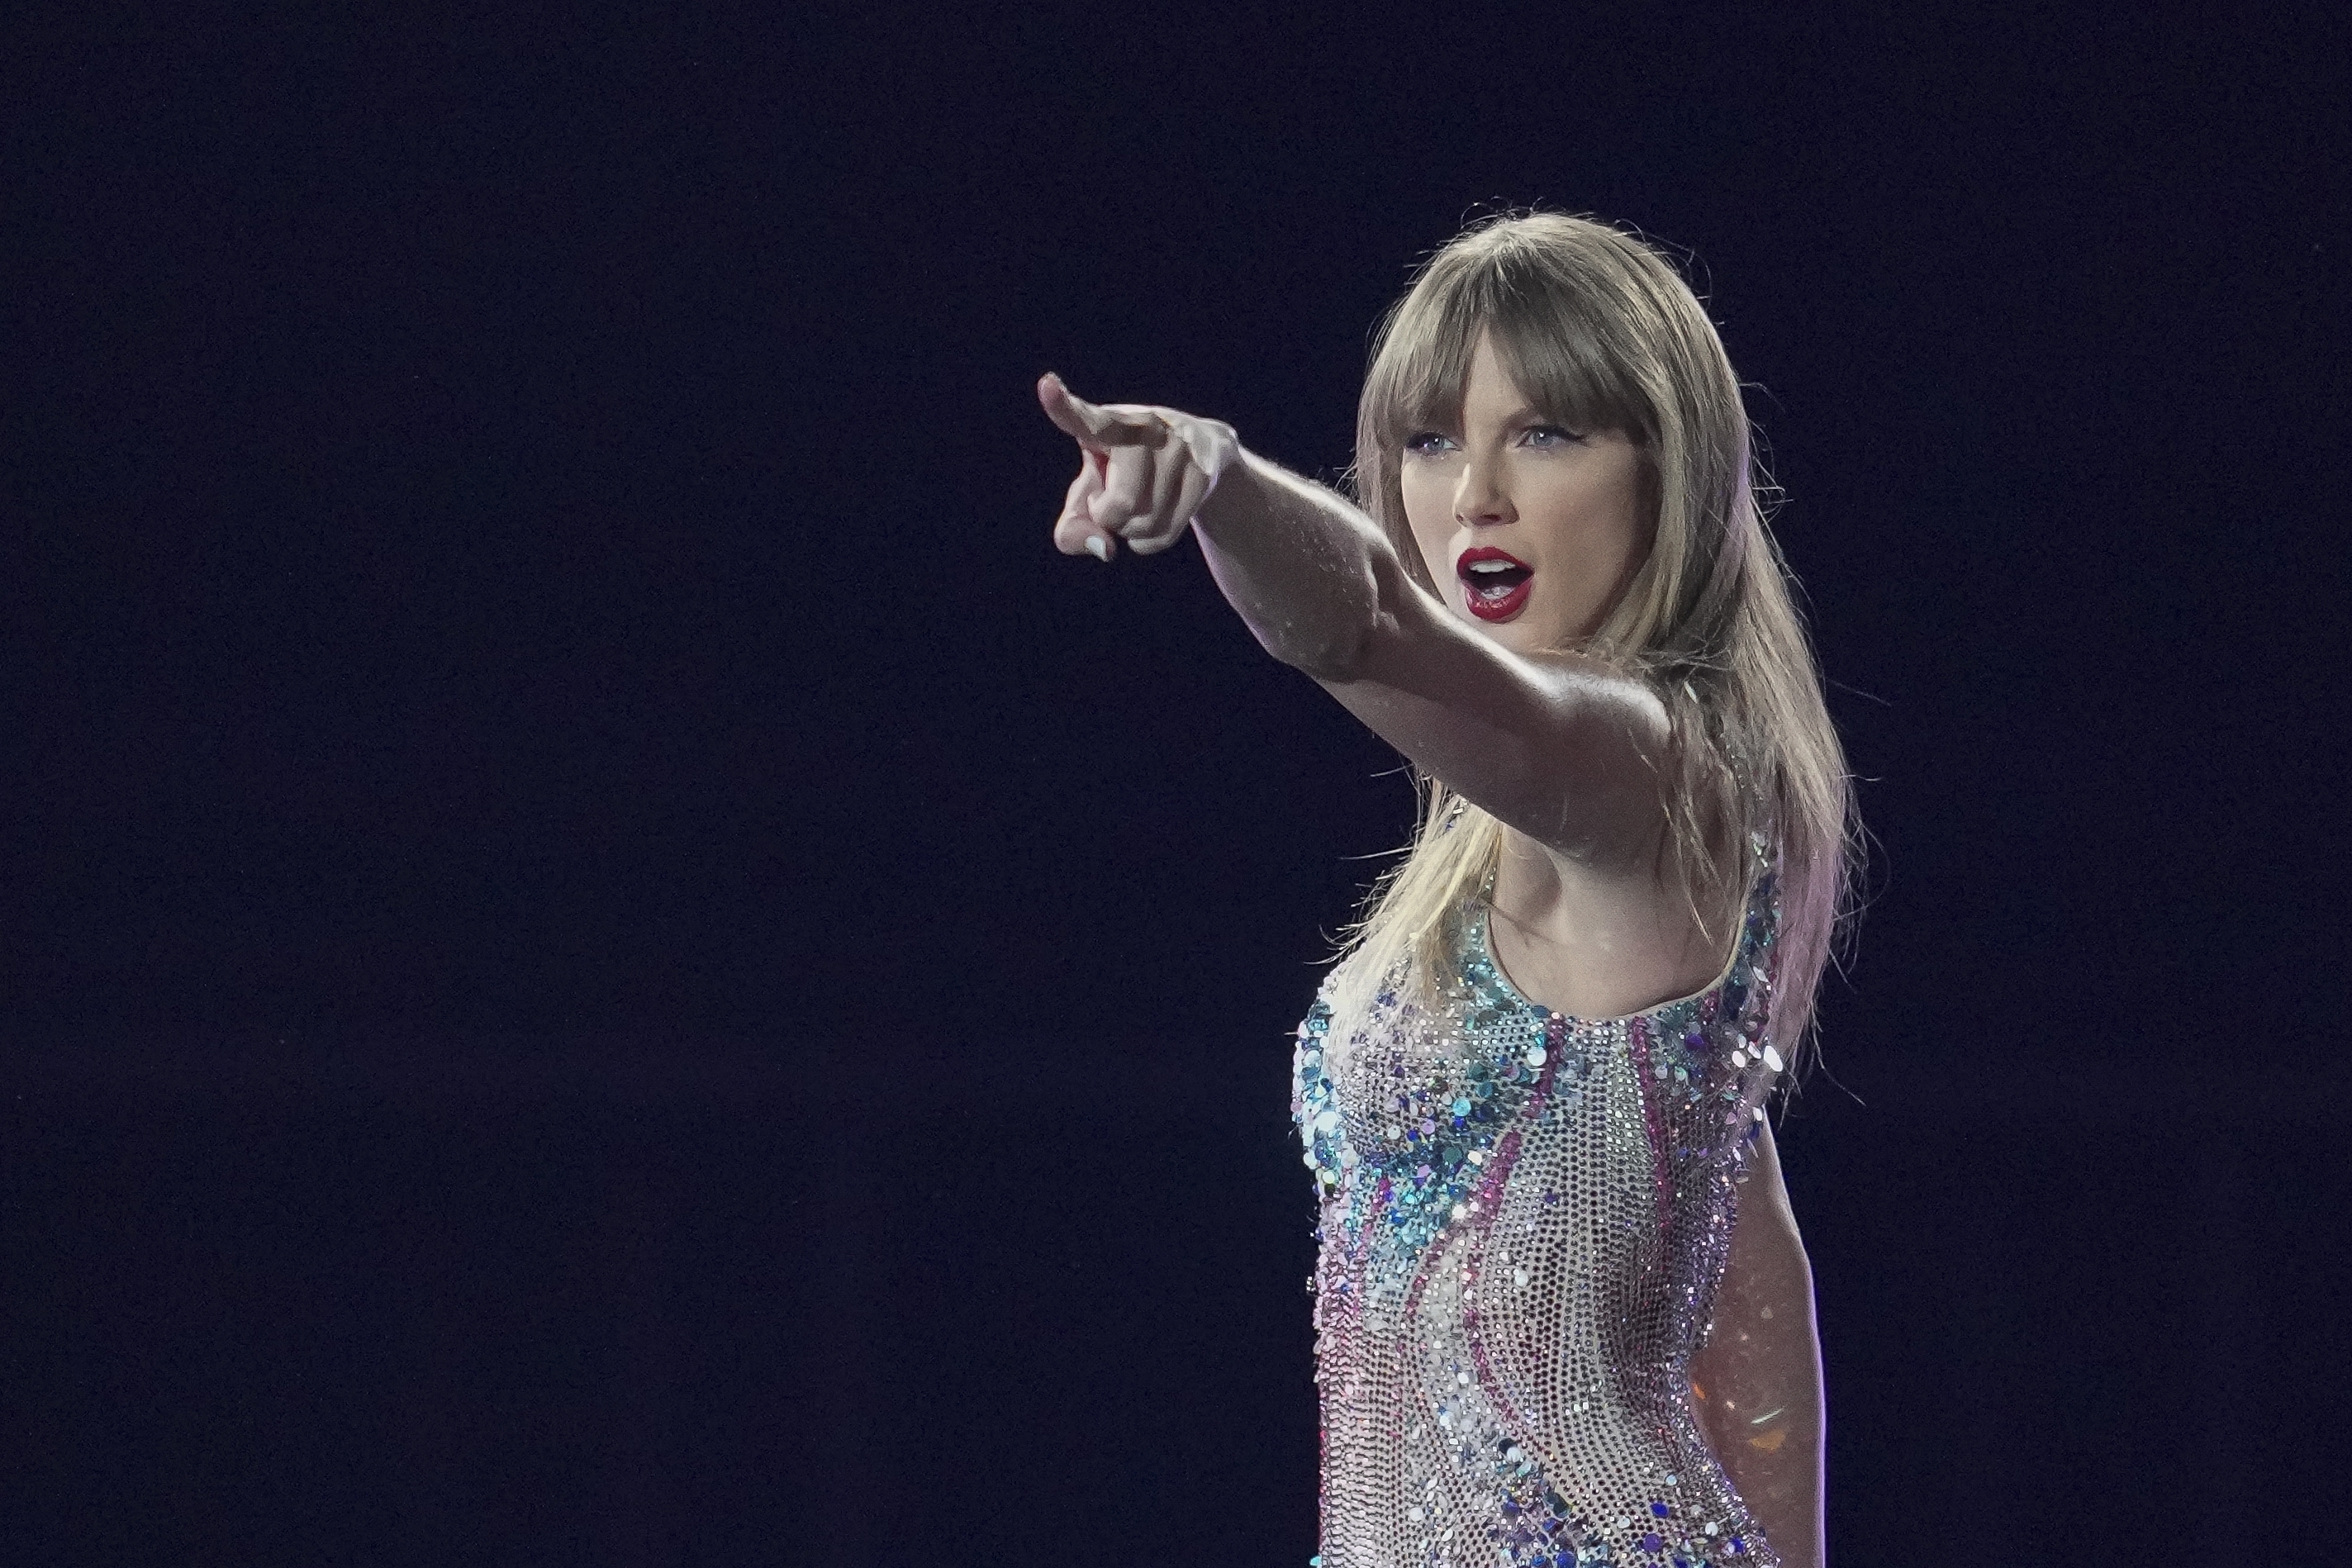 Sask. town offers to name itself after Taylor Swift if she comes to province